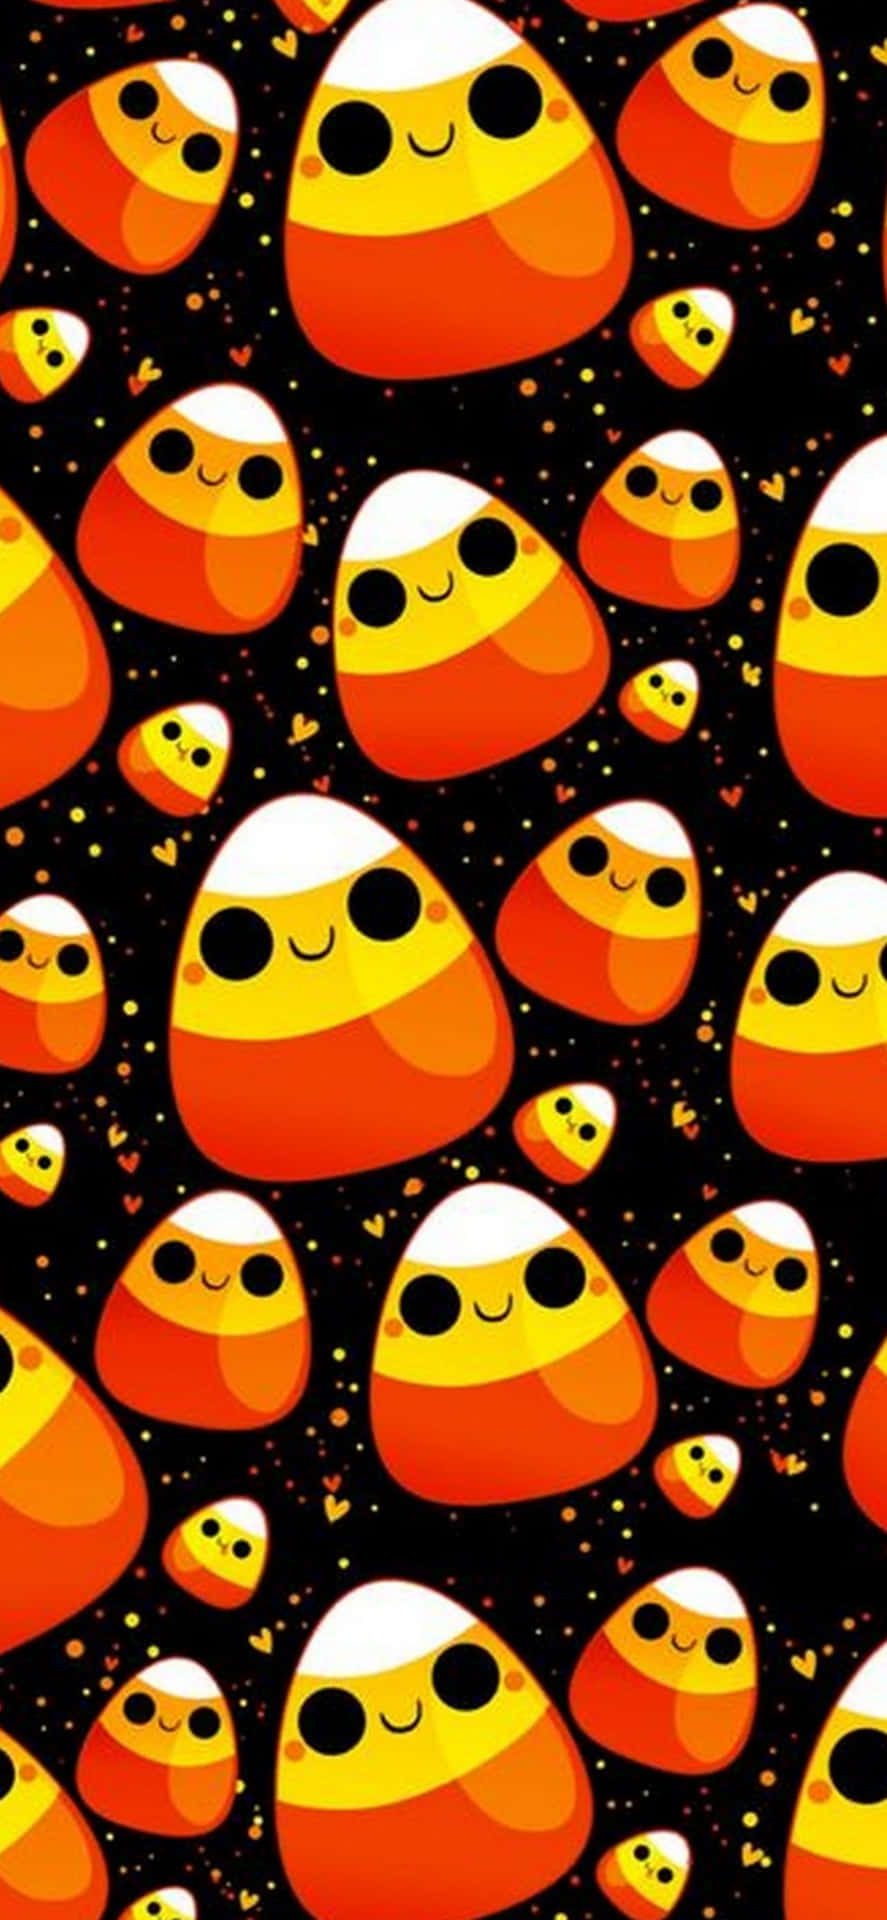 Get in the spirit of Halloween with this themed iPhone wallpaper